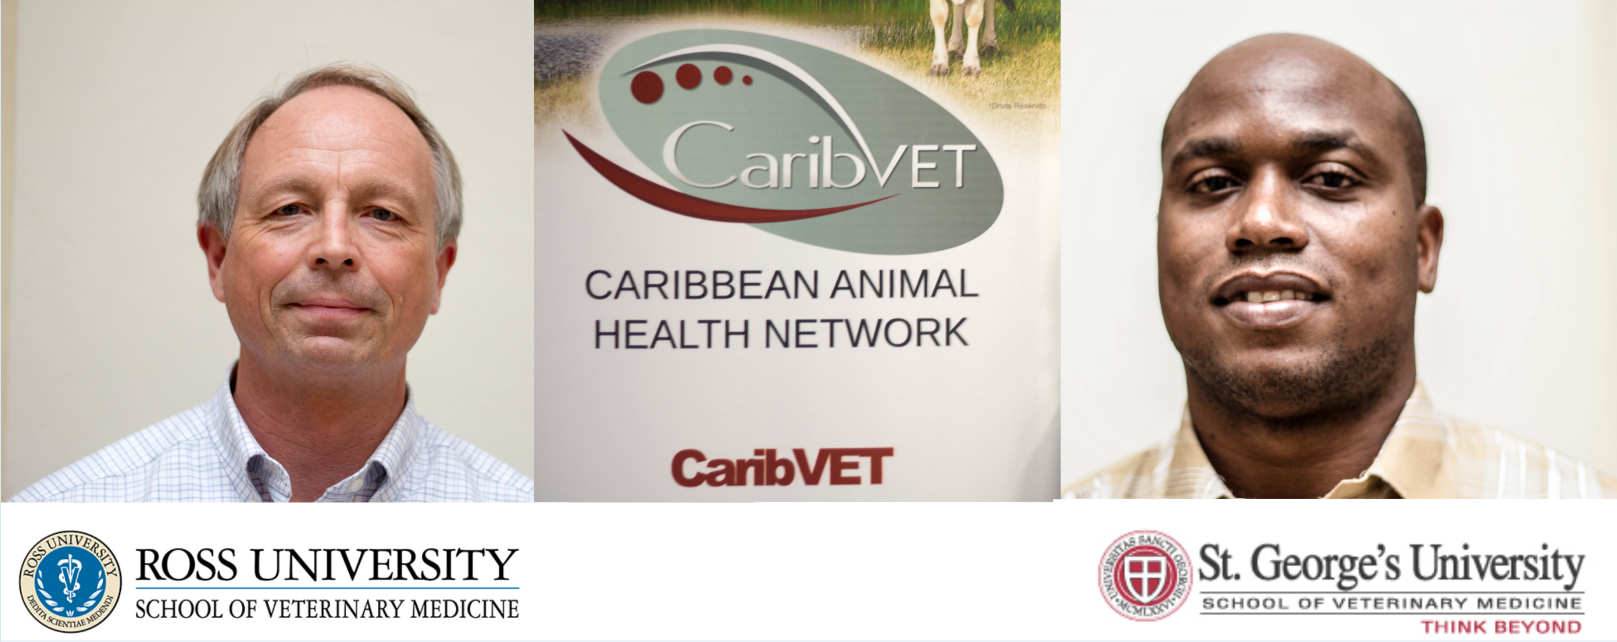 new-caribvet-sc-members-rusvm-and-sgu-svm-respectively-represented-at-the-12th-caribvet-sc-meeting-by-dr.-lee-willingham-associate-dean-and-by-dr.-wayne-sylvester-director-of-small-animal-clinic.png